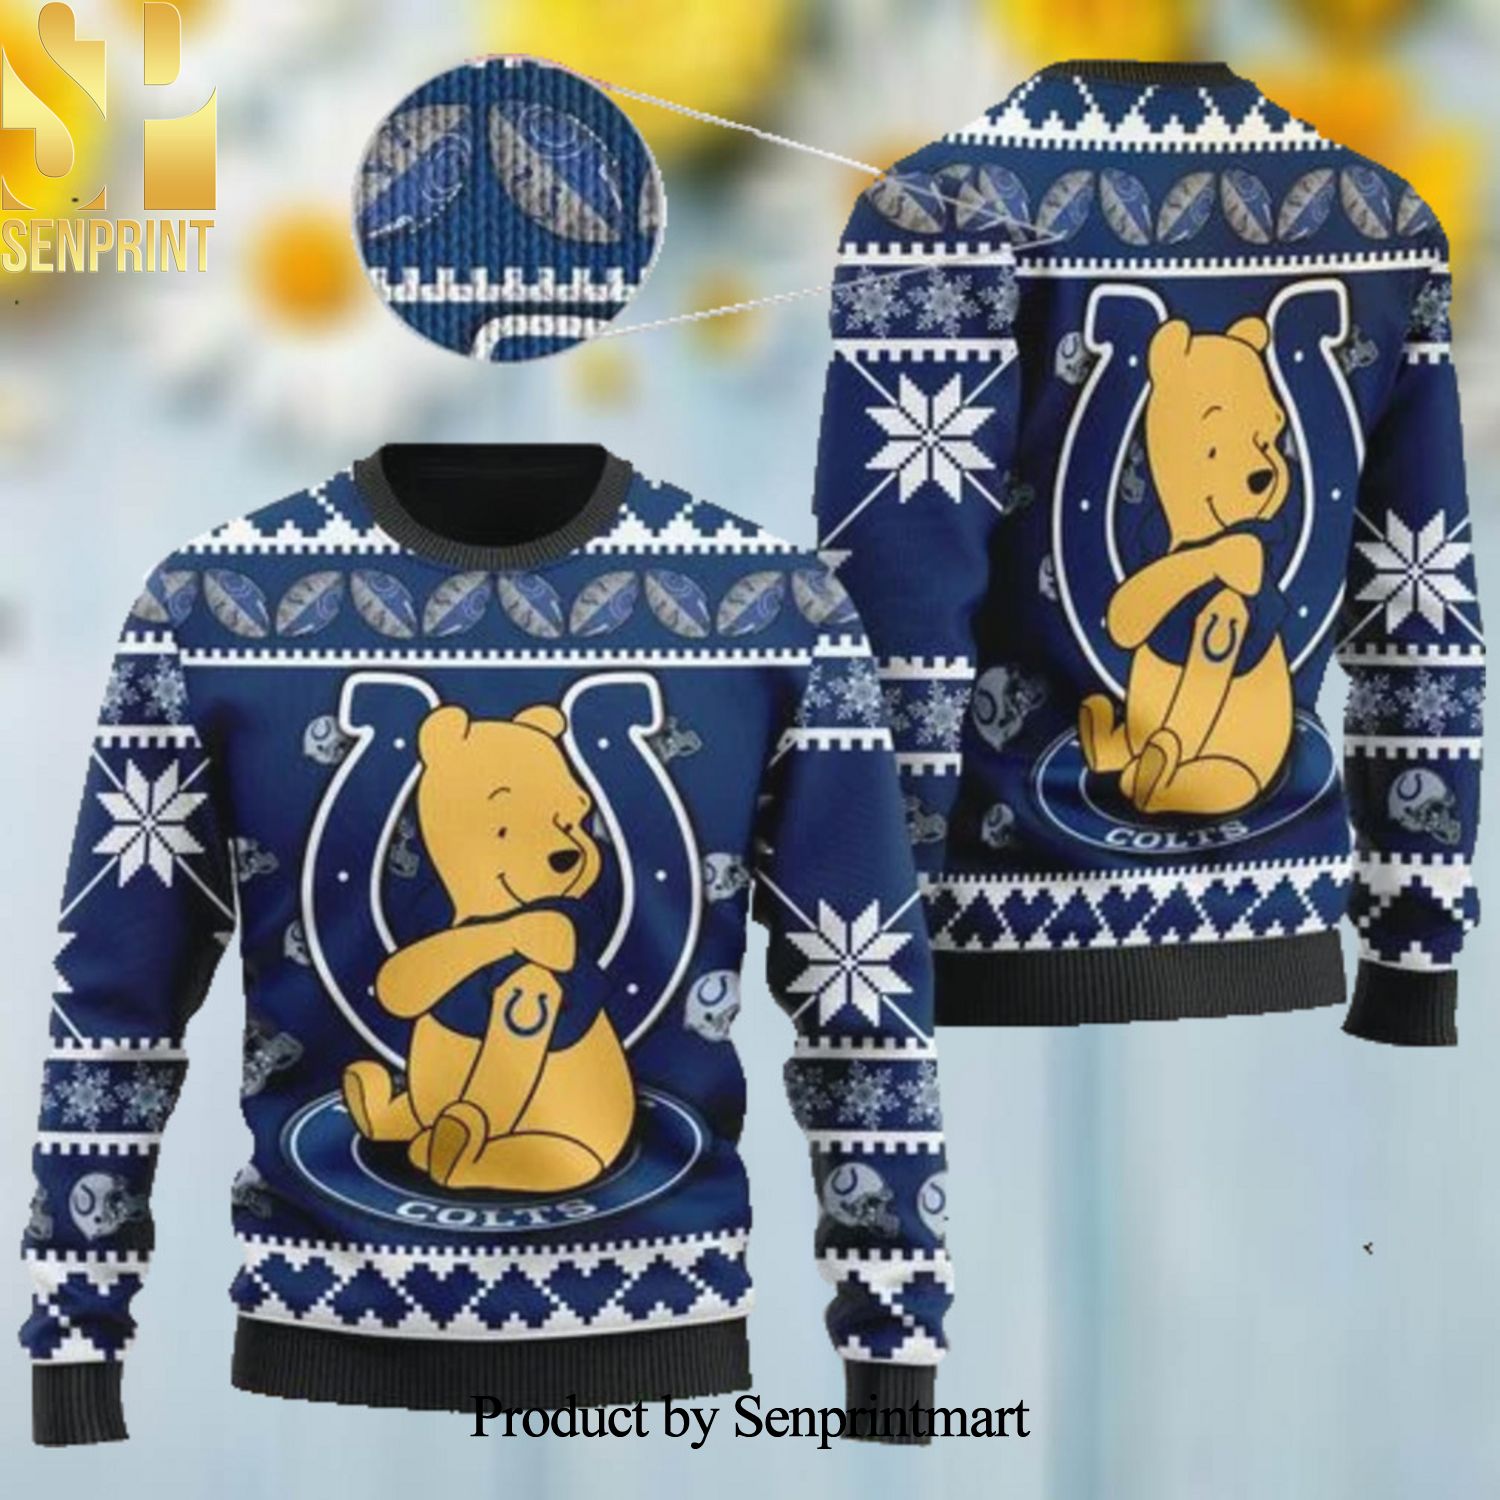 Indianapolis Colts NFL American Football Team Logo Cute Winnie The Pooh Bear Ugly Xmas Wool Knitted Sweater